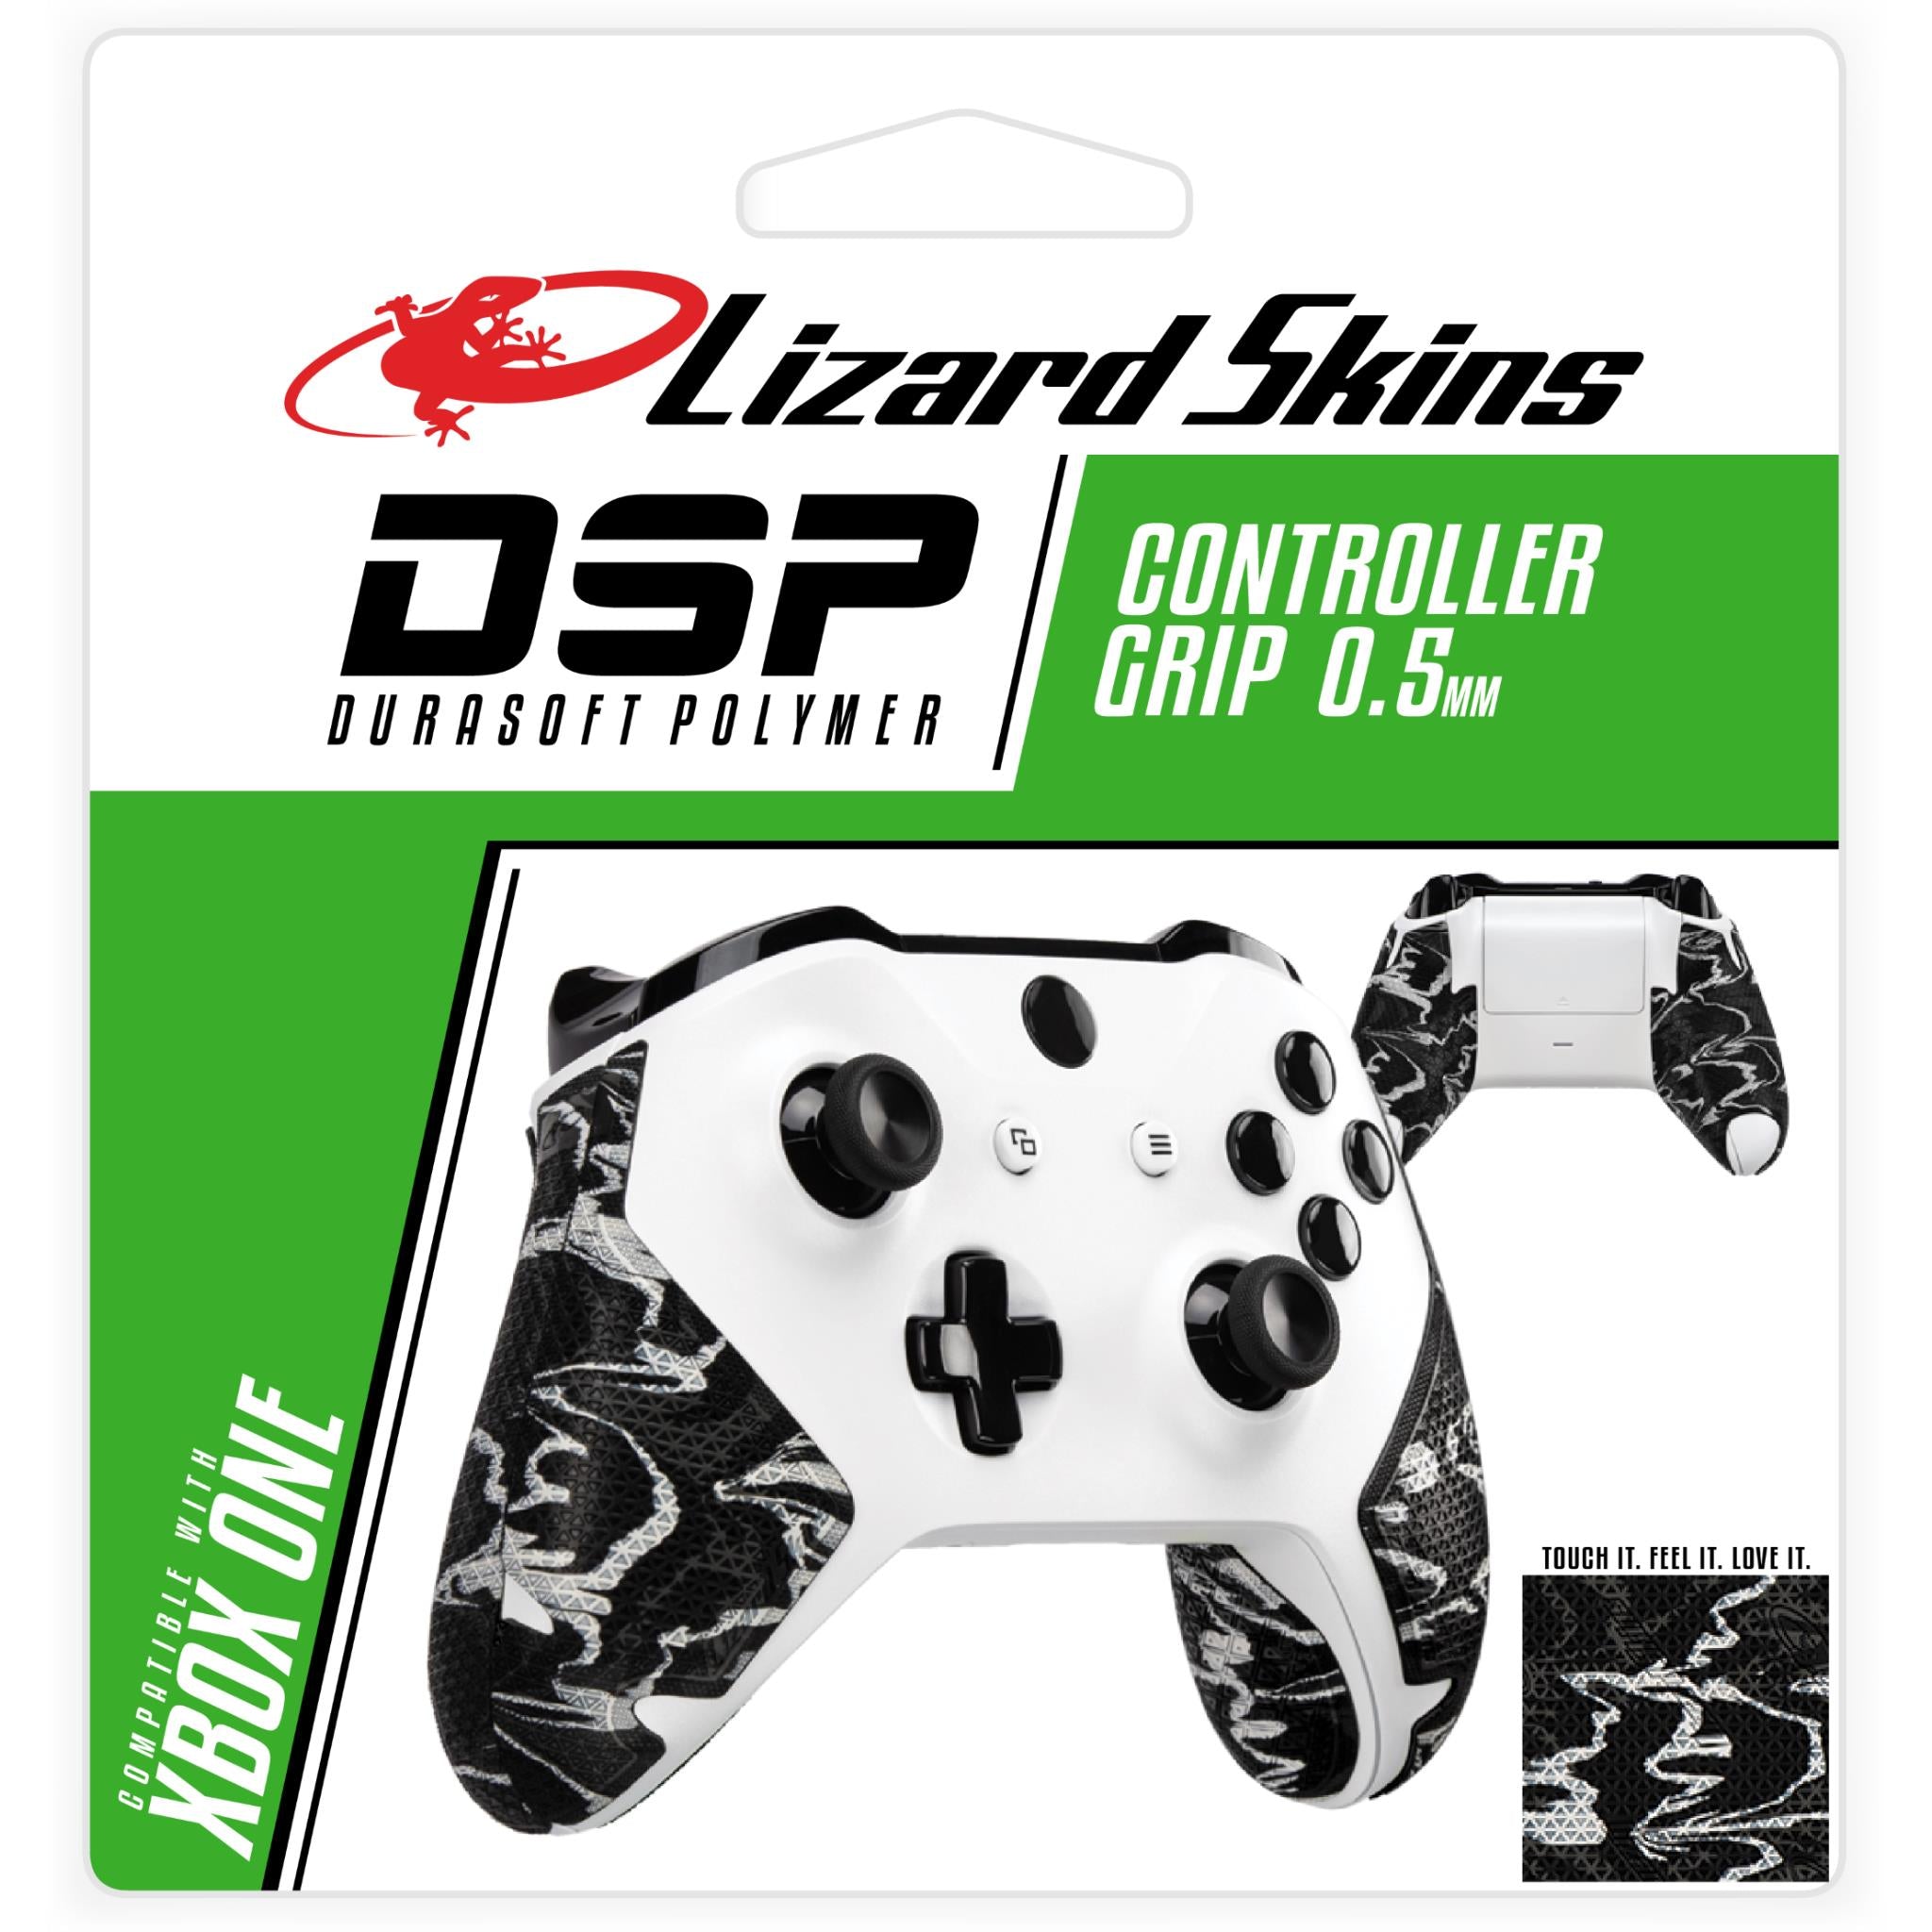 lizard skins dsp controller grip for xbox one (black camo)